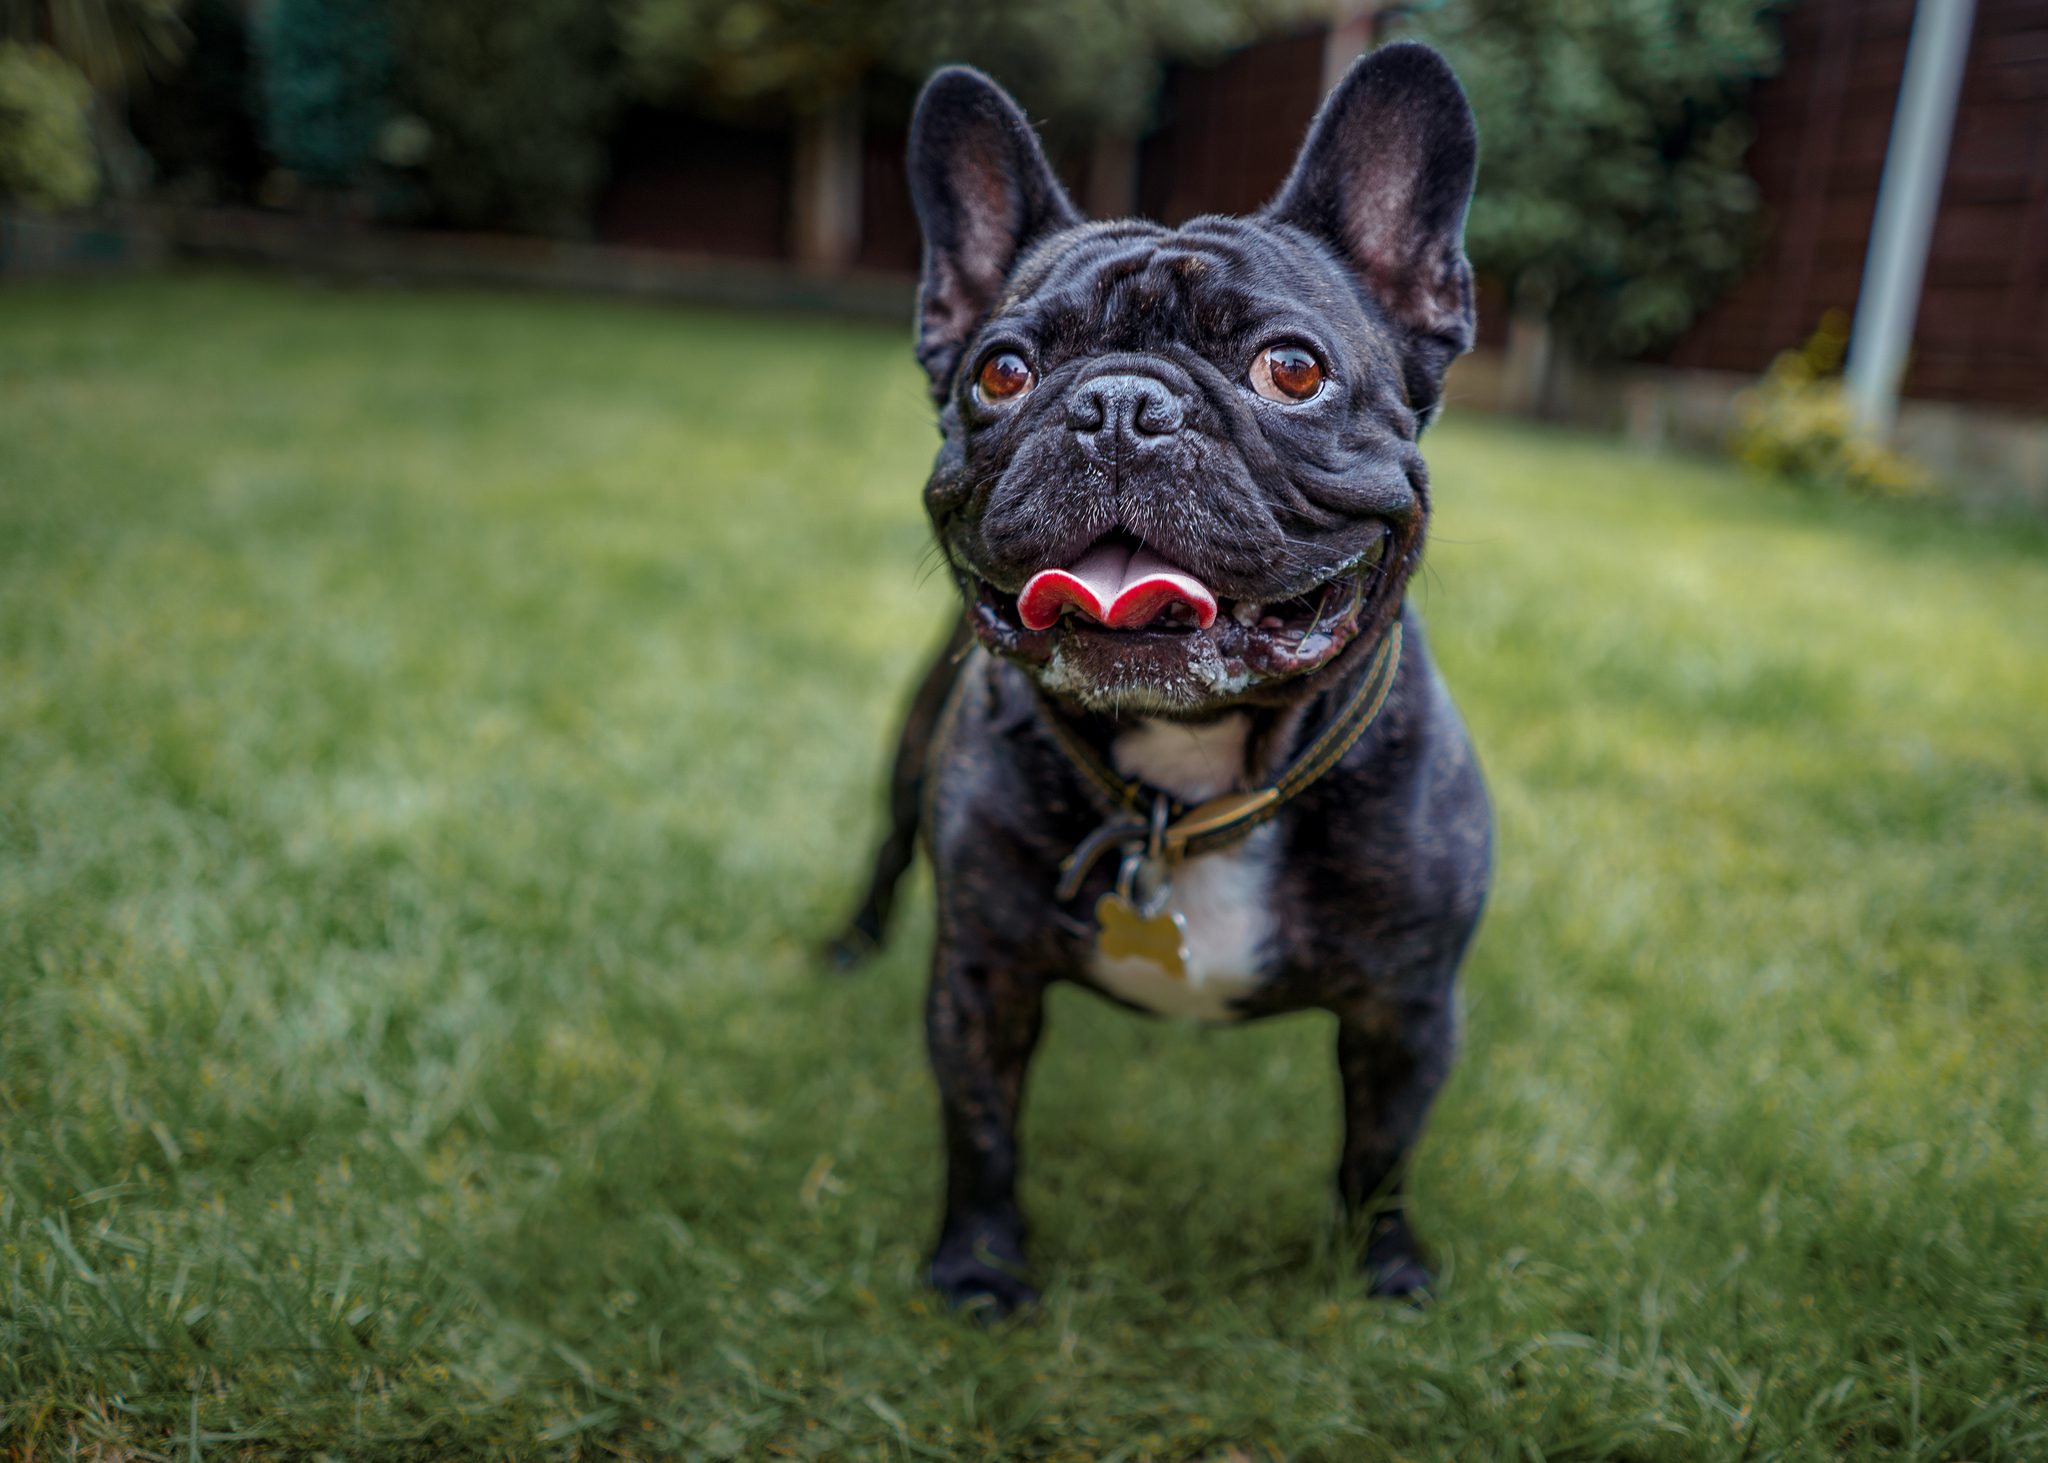 View of french bulldog standing on grass